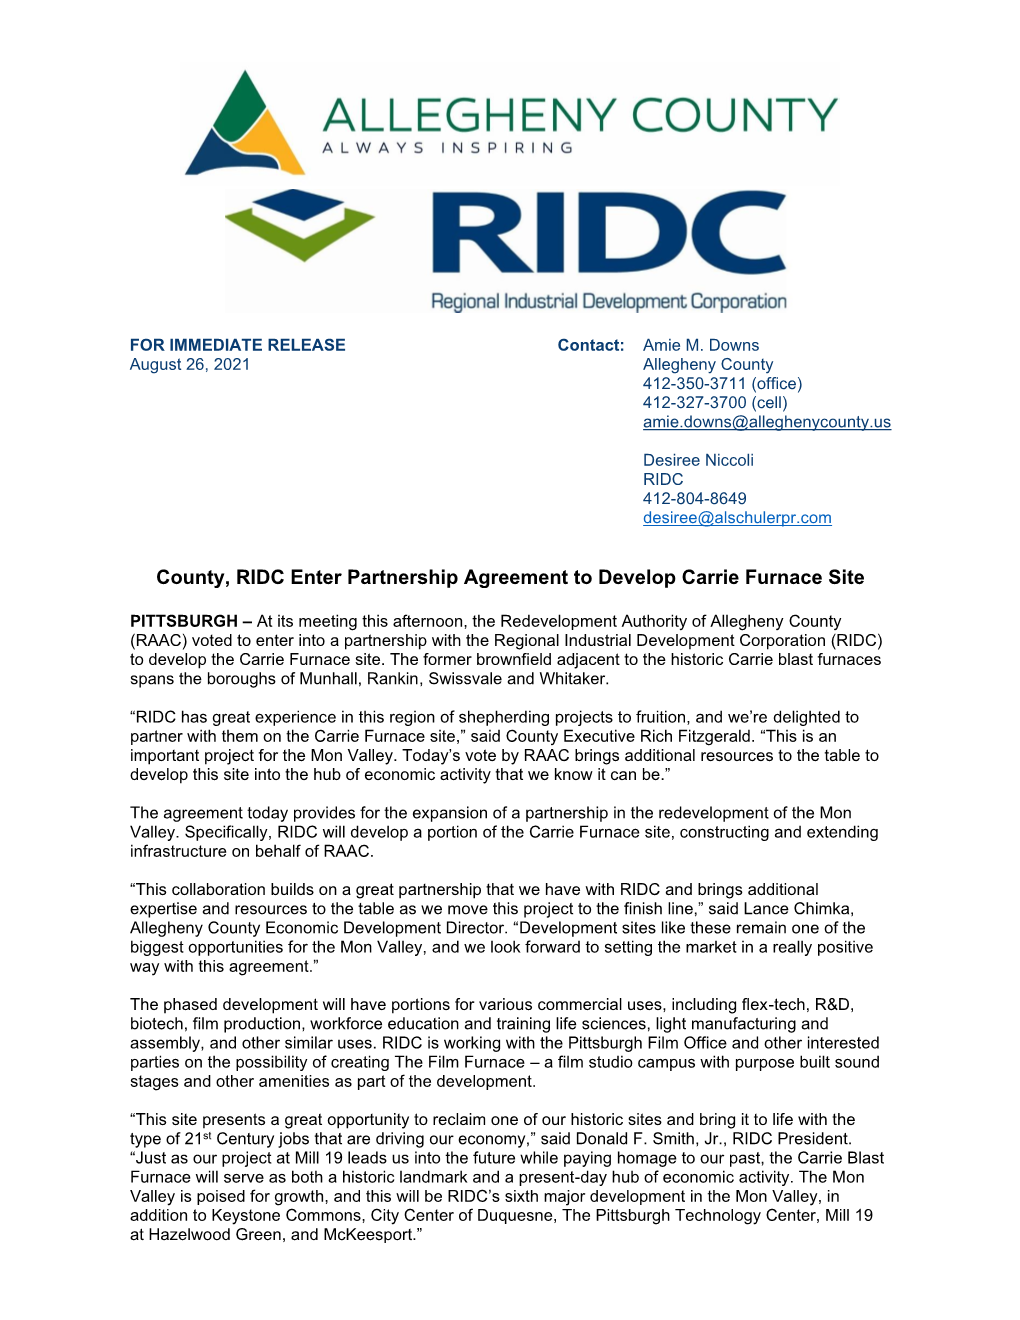 County, RIDC Enter Partnership Agreement to Develop Carrie Furnace Site